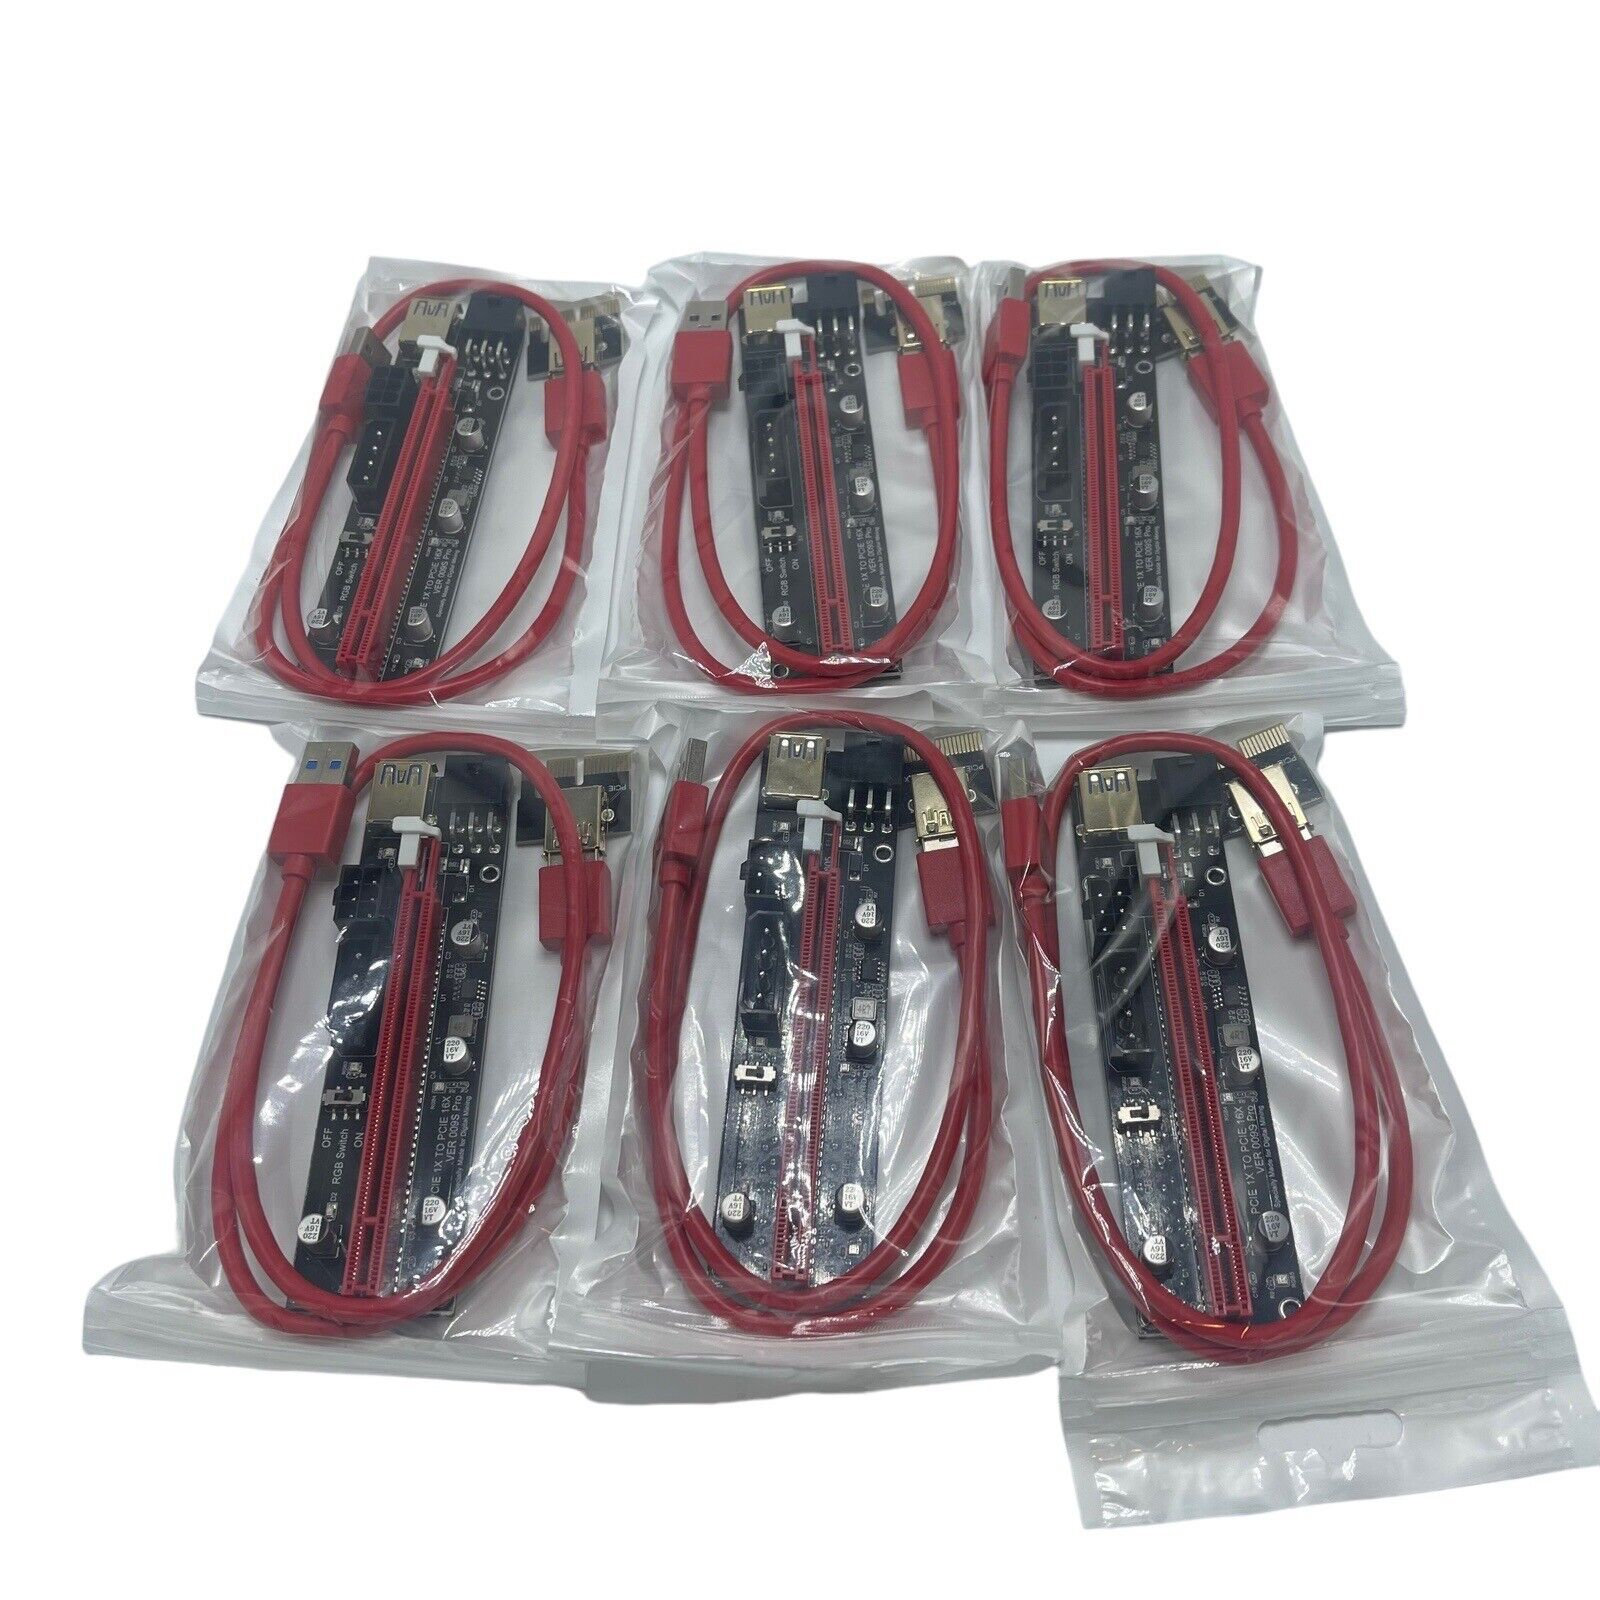 6X 60cm VER009S PCI-E Riser Card PCIe 1x to 16x USB3.0 Data Cable Mining h-